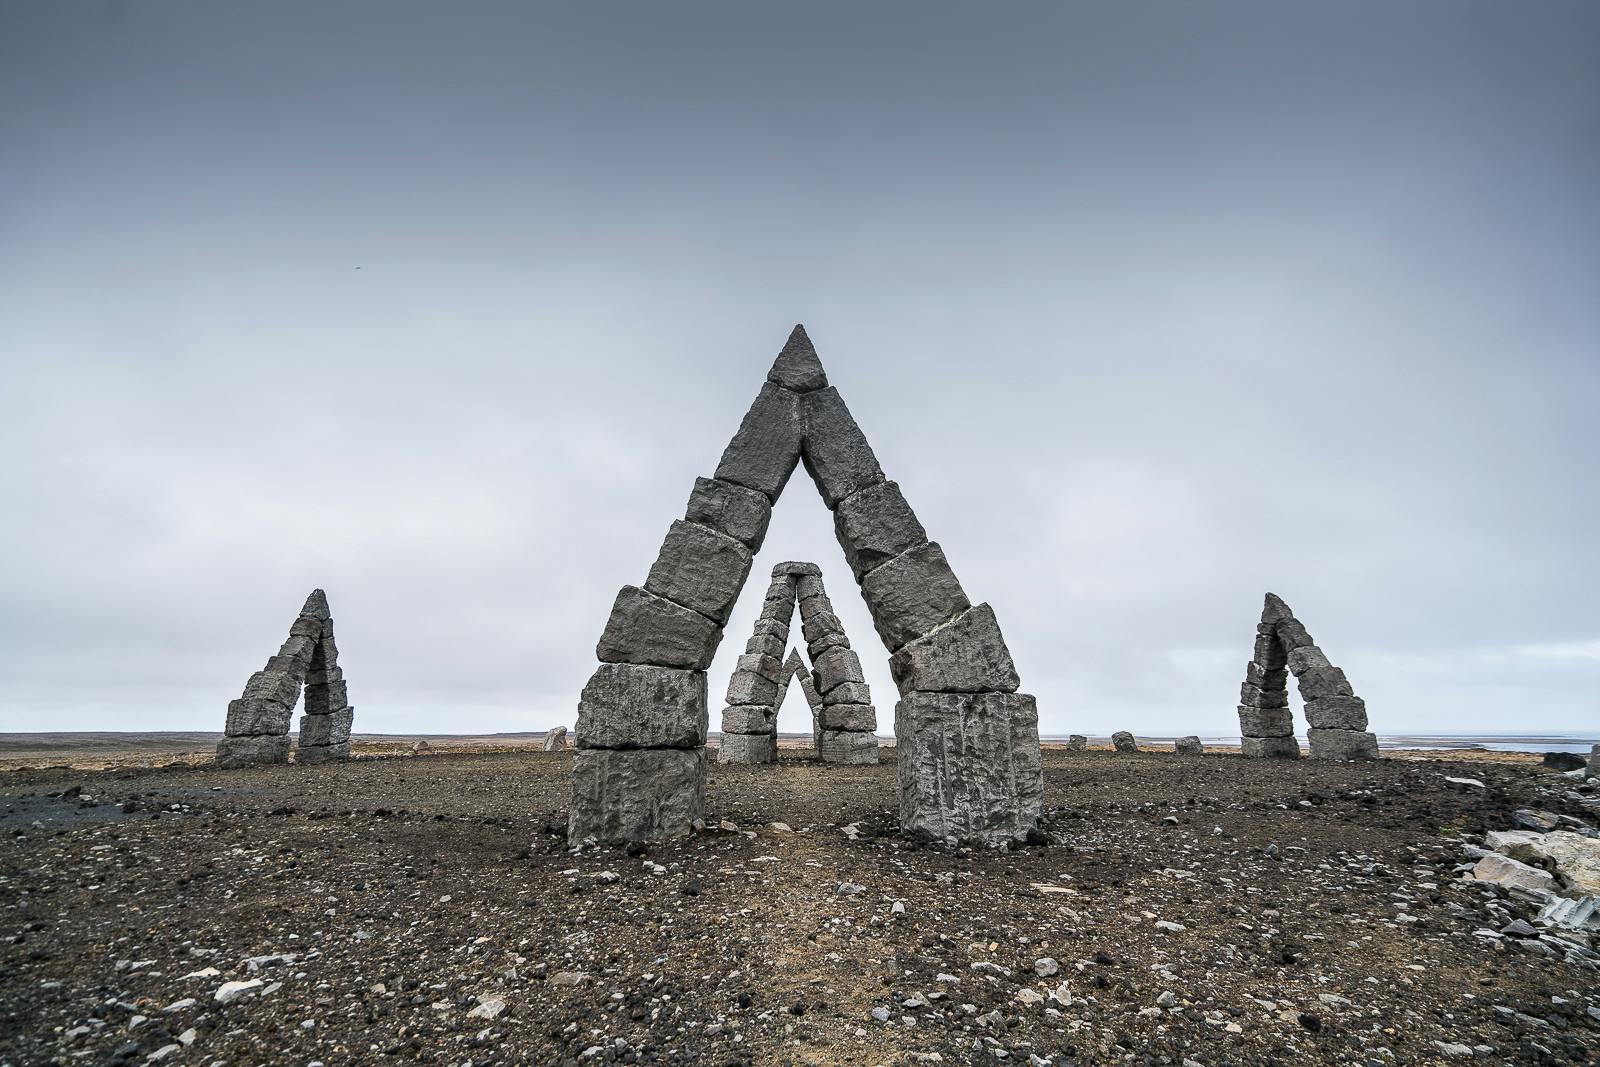 Arctic stone henge under a grey sky in North East Iceland